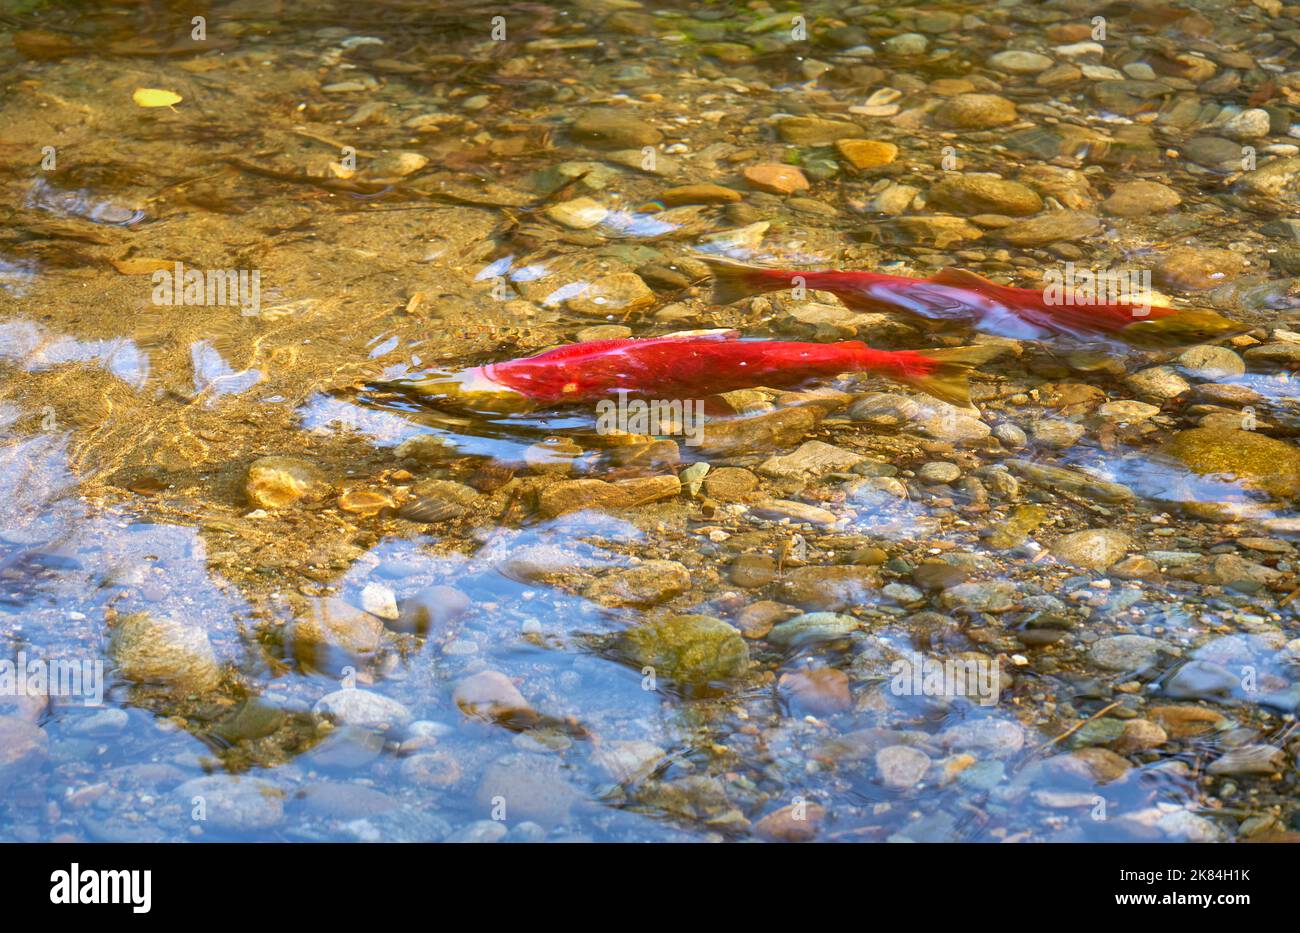 Spawning Male and Female Sockeye Salmon. A male and female Sockeye salmon ready to spawn in the shallows of the Adams River, British Columbia, Canada. Stock Photo